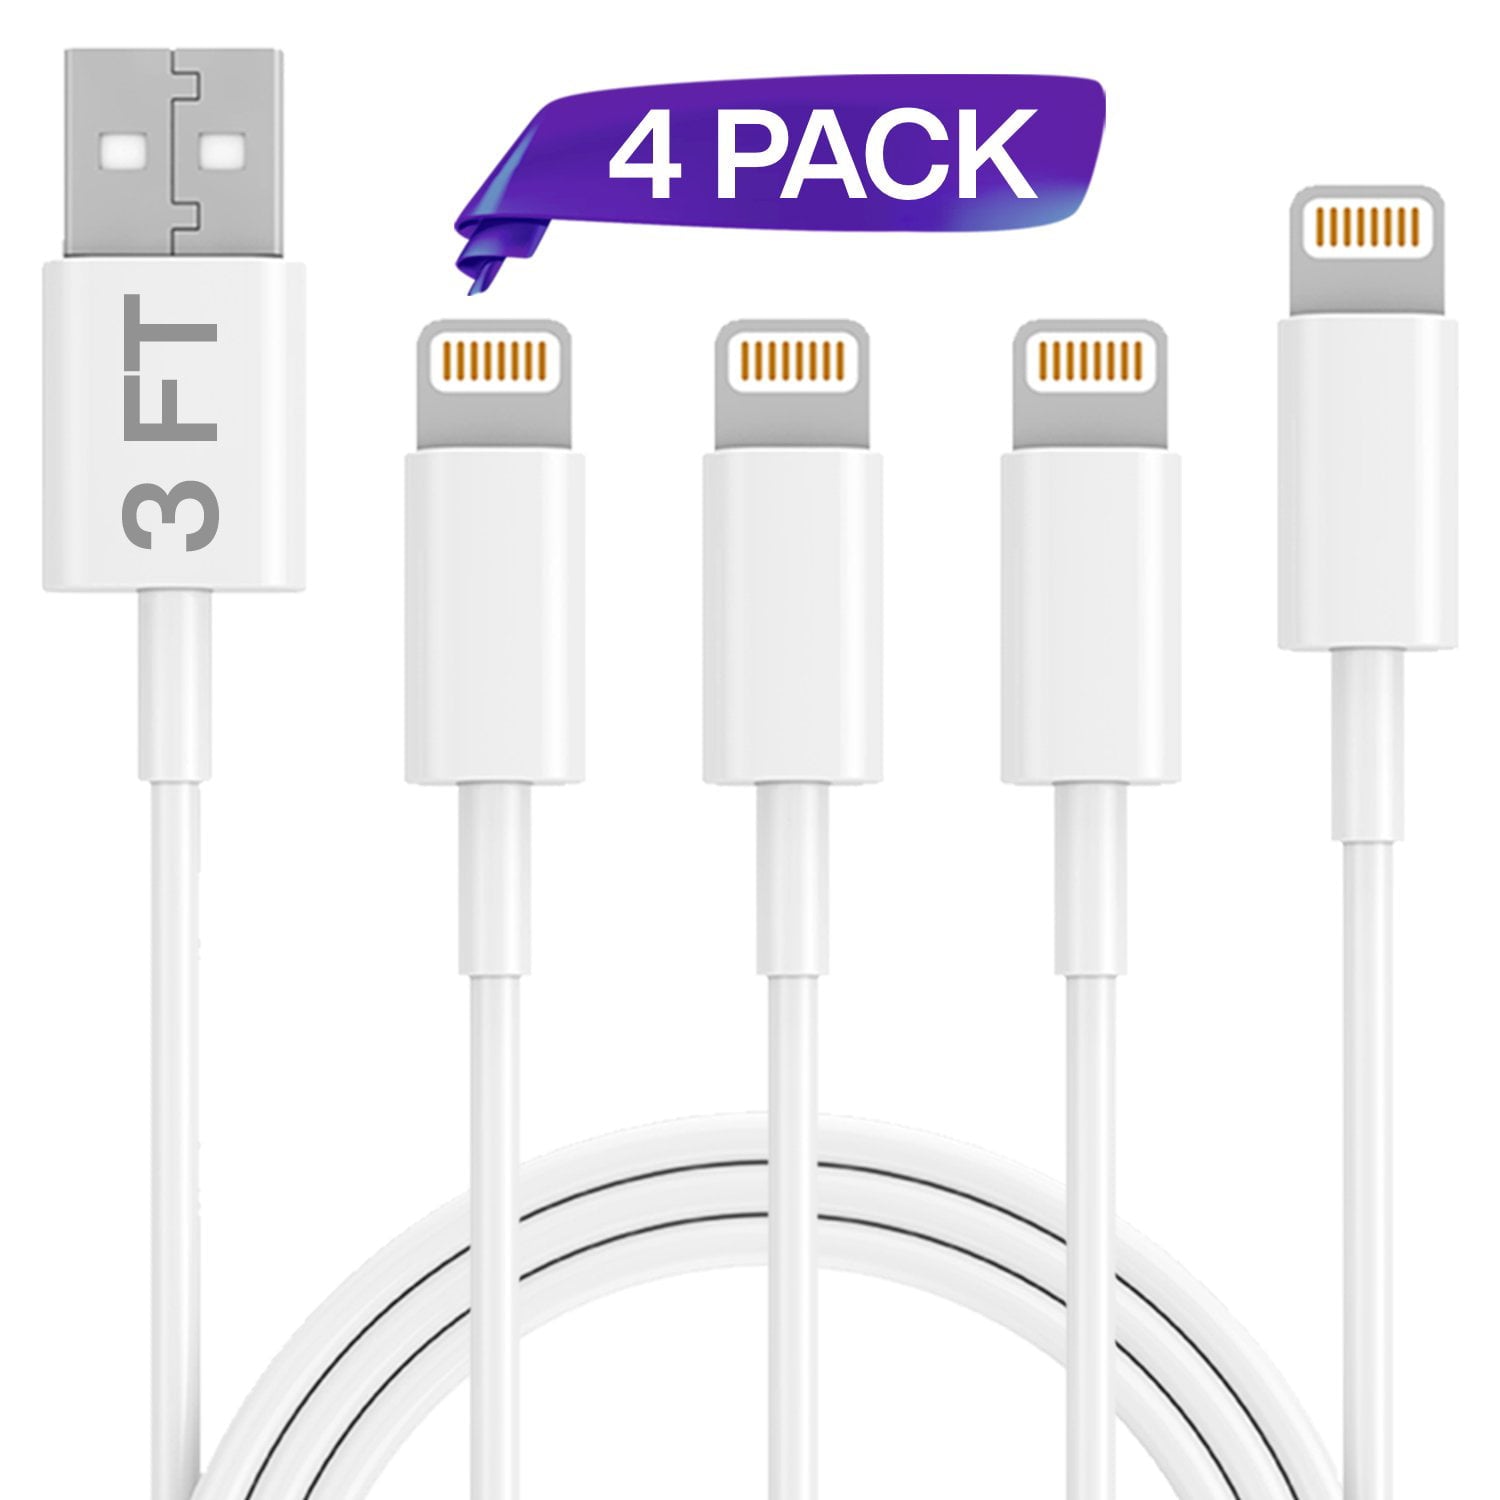 Junipel Built-in Safeguard Protection from Over-heating, Charging- White Durable Lightning Charging Cable Set of 4